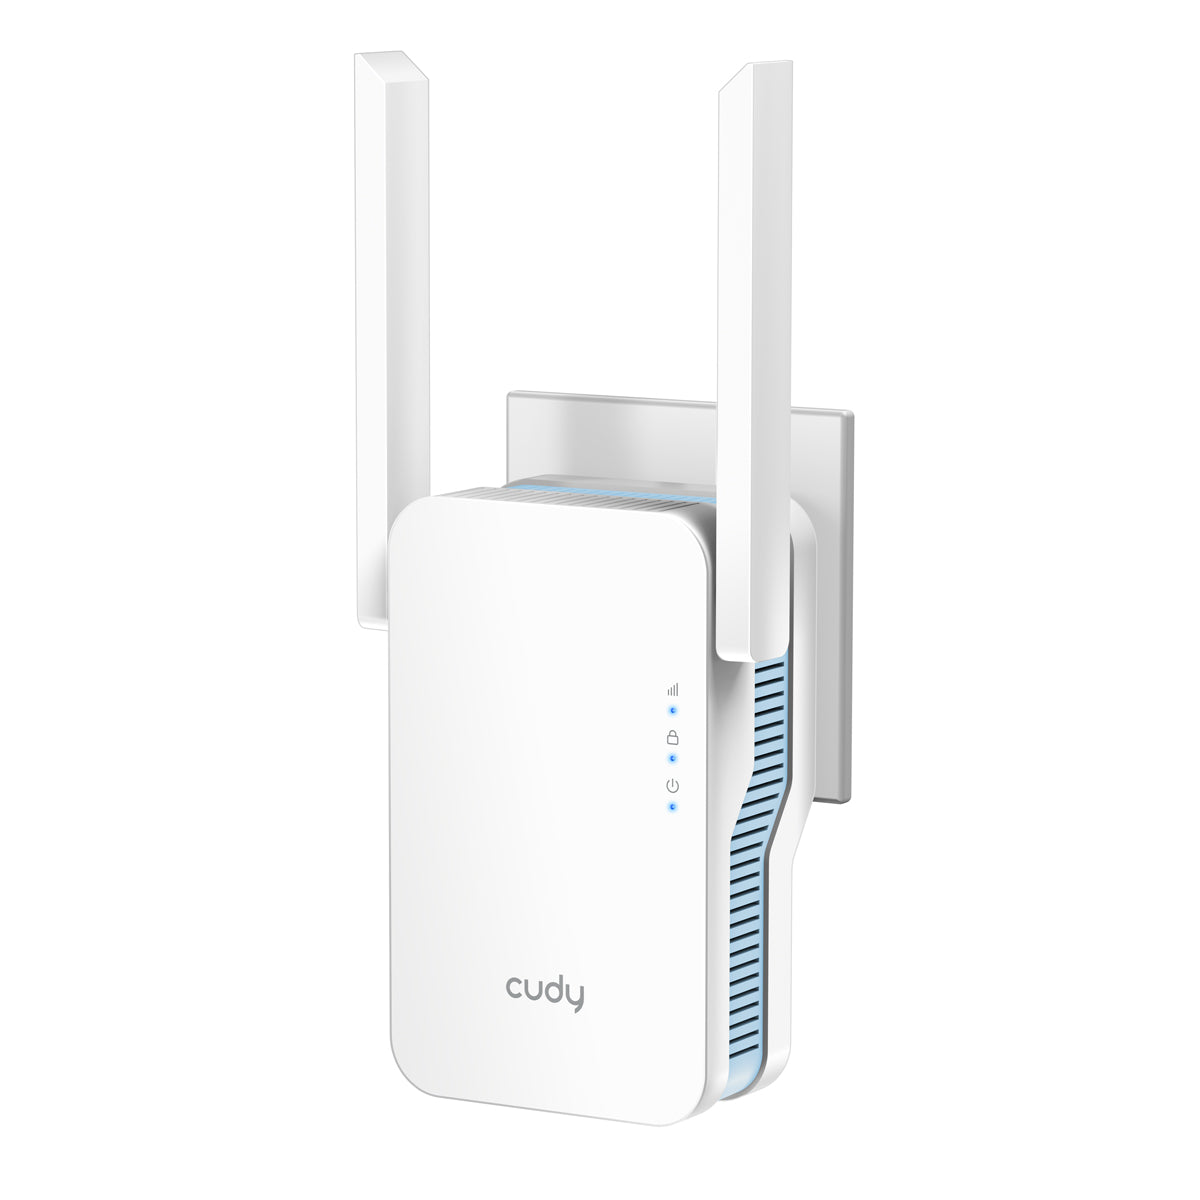 Cudy Dual Band WiFi 5 1200Mbps Fast Ethernet Range Extender | RE1200 (mesh)*